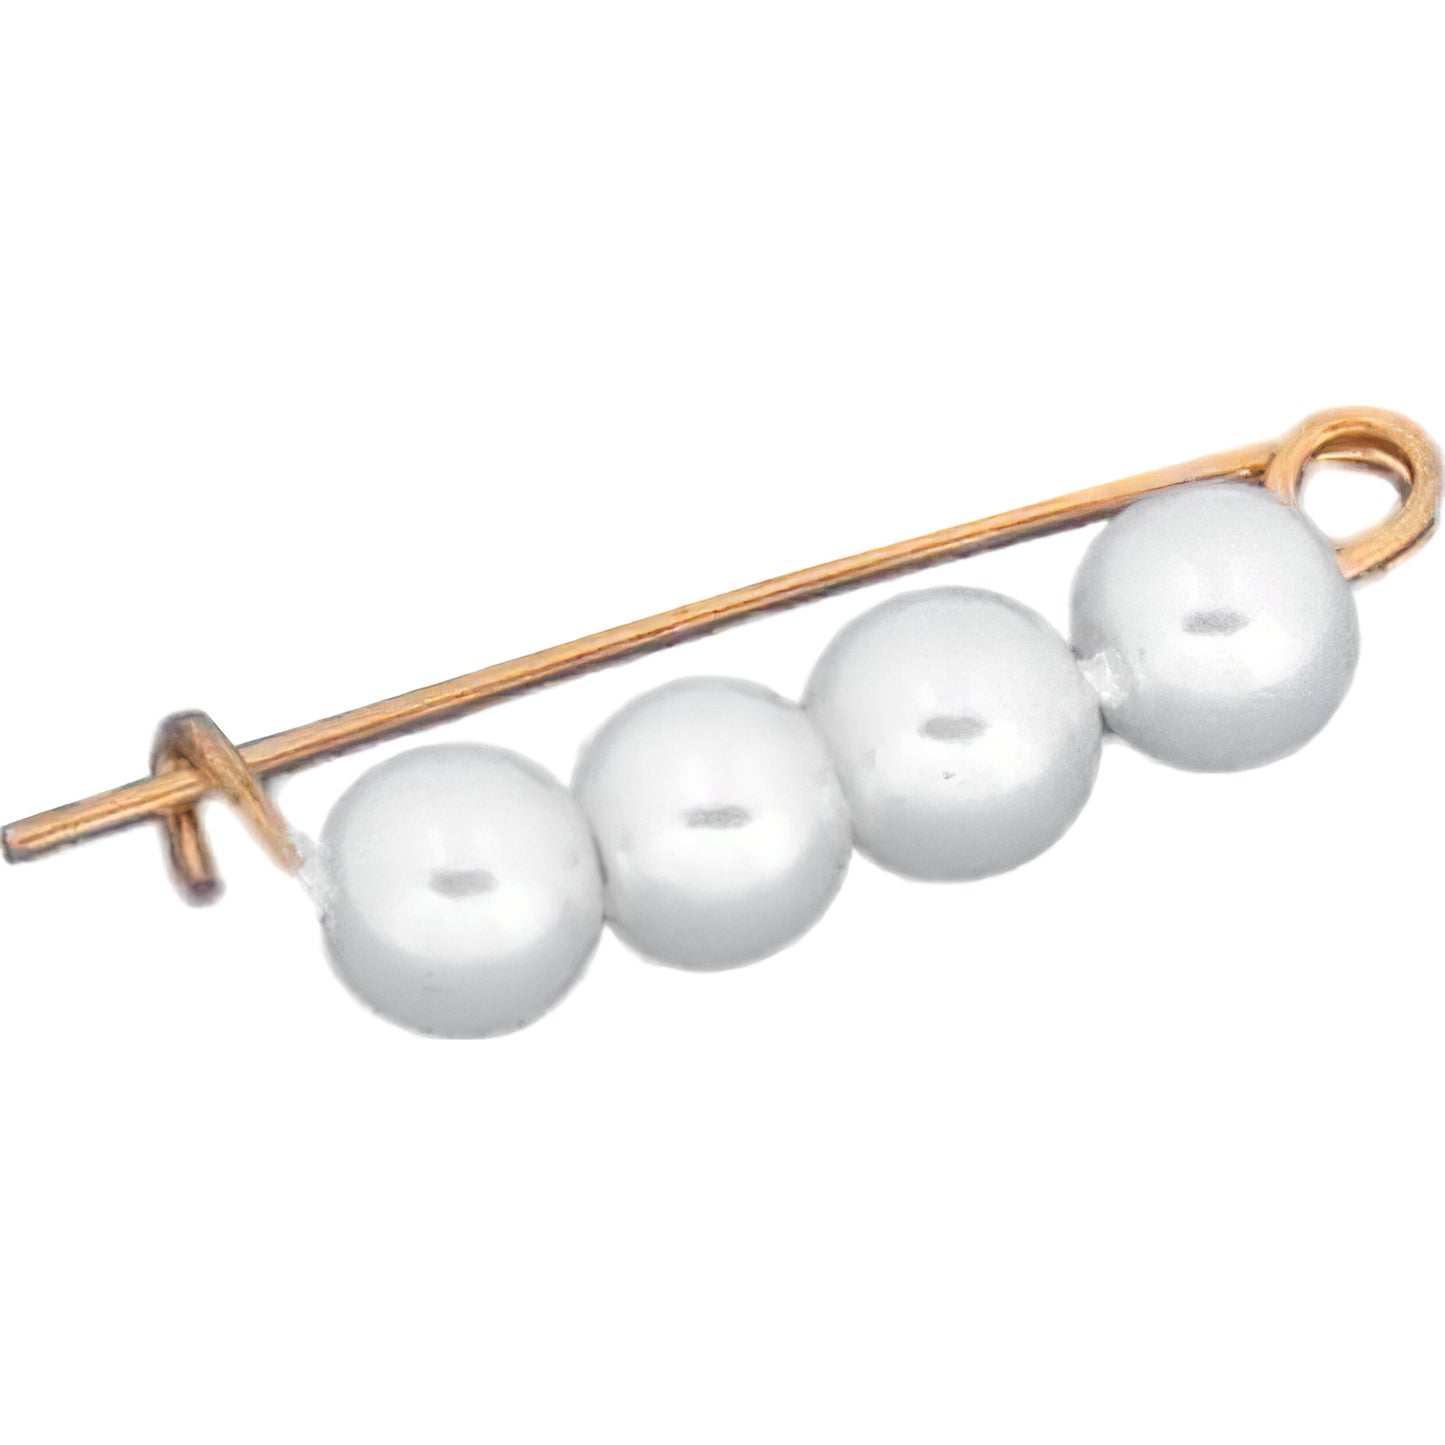 4 Pearl Enhancer Bead Shortening Clasps Gold Parts with Imitation Pearls